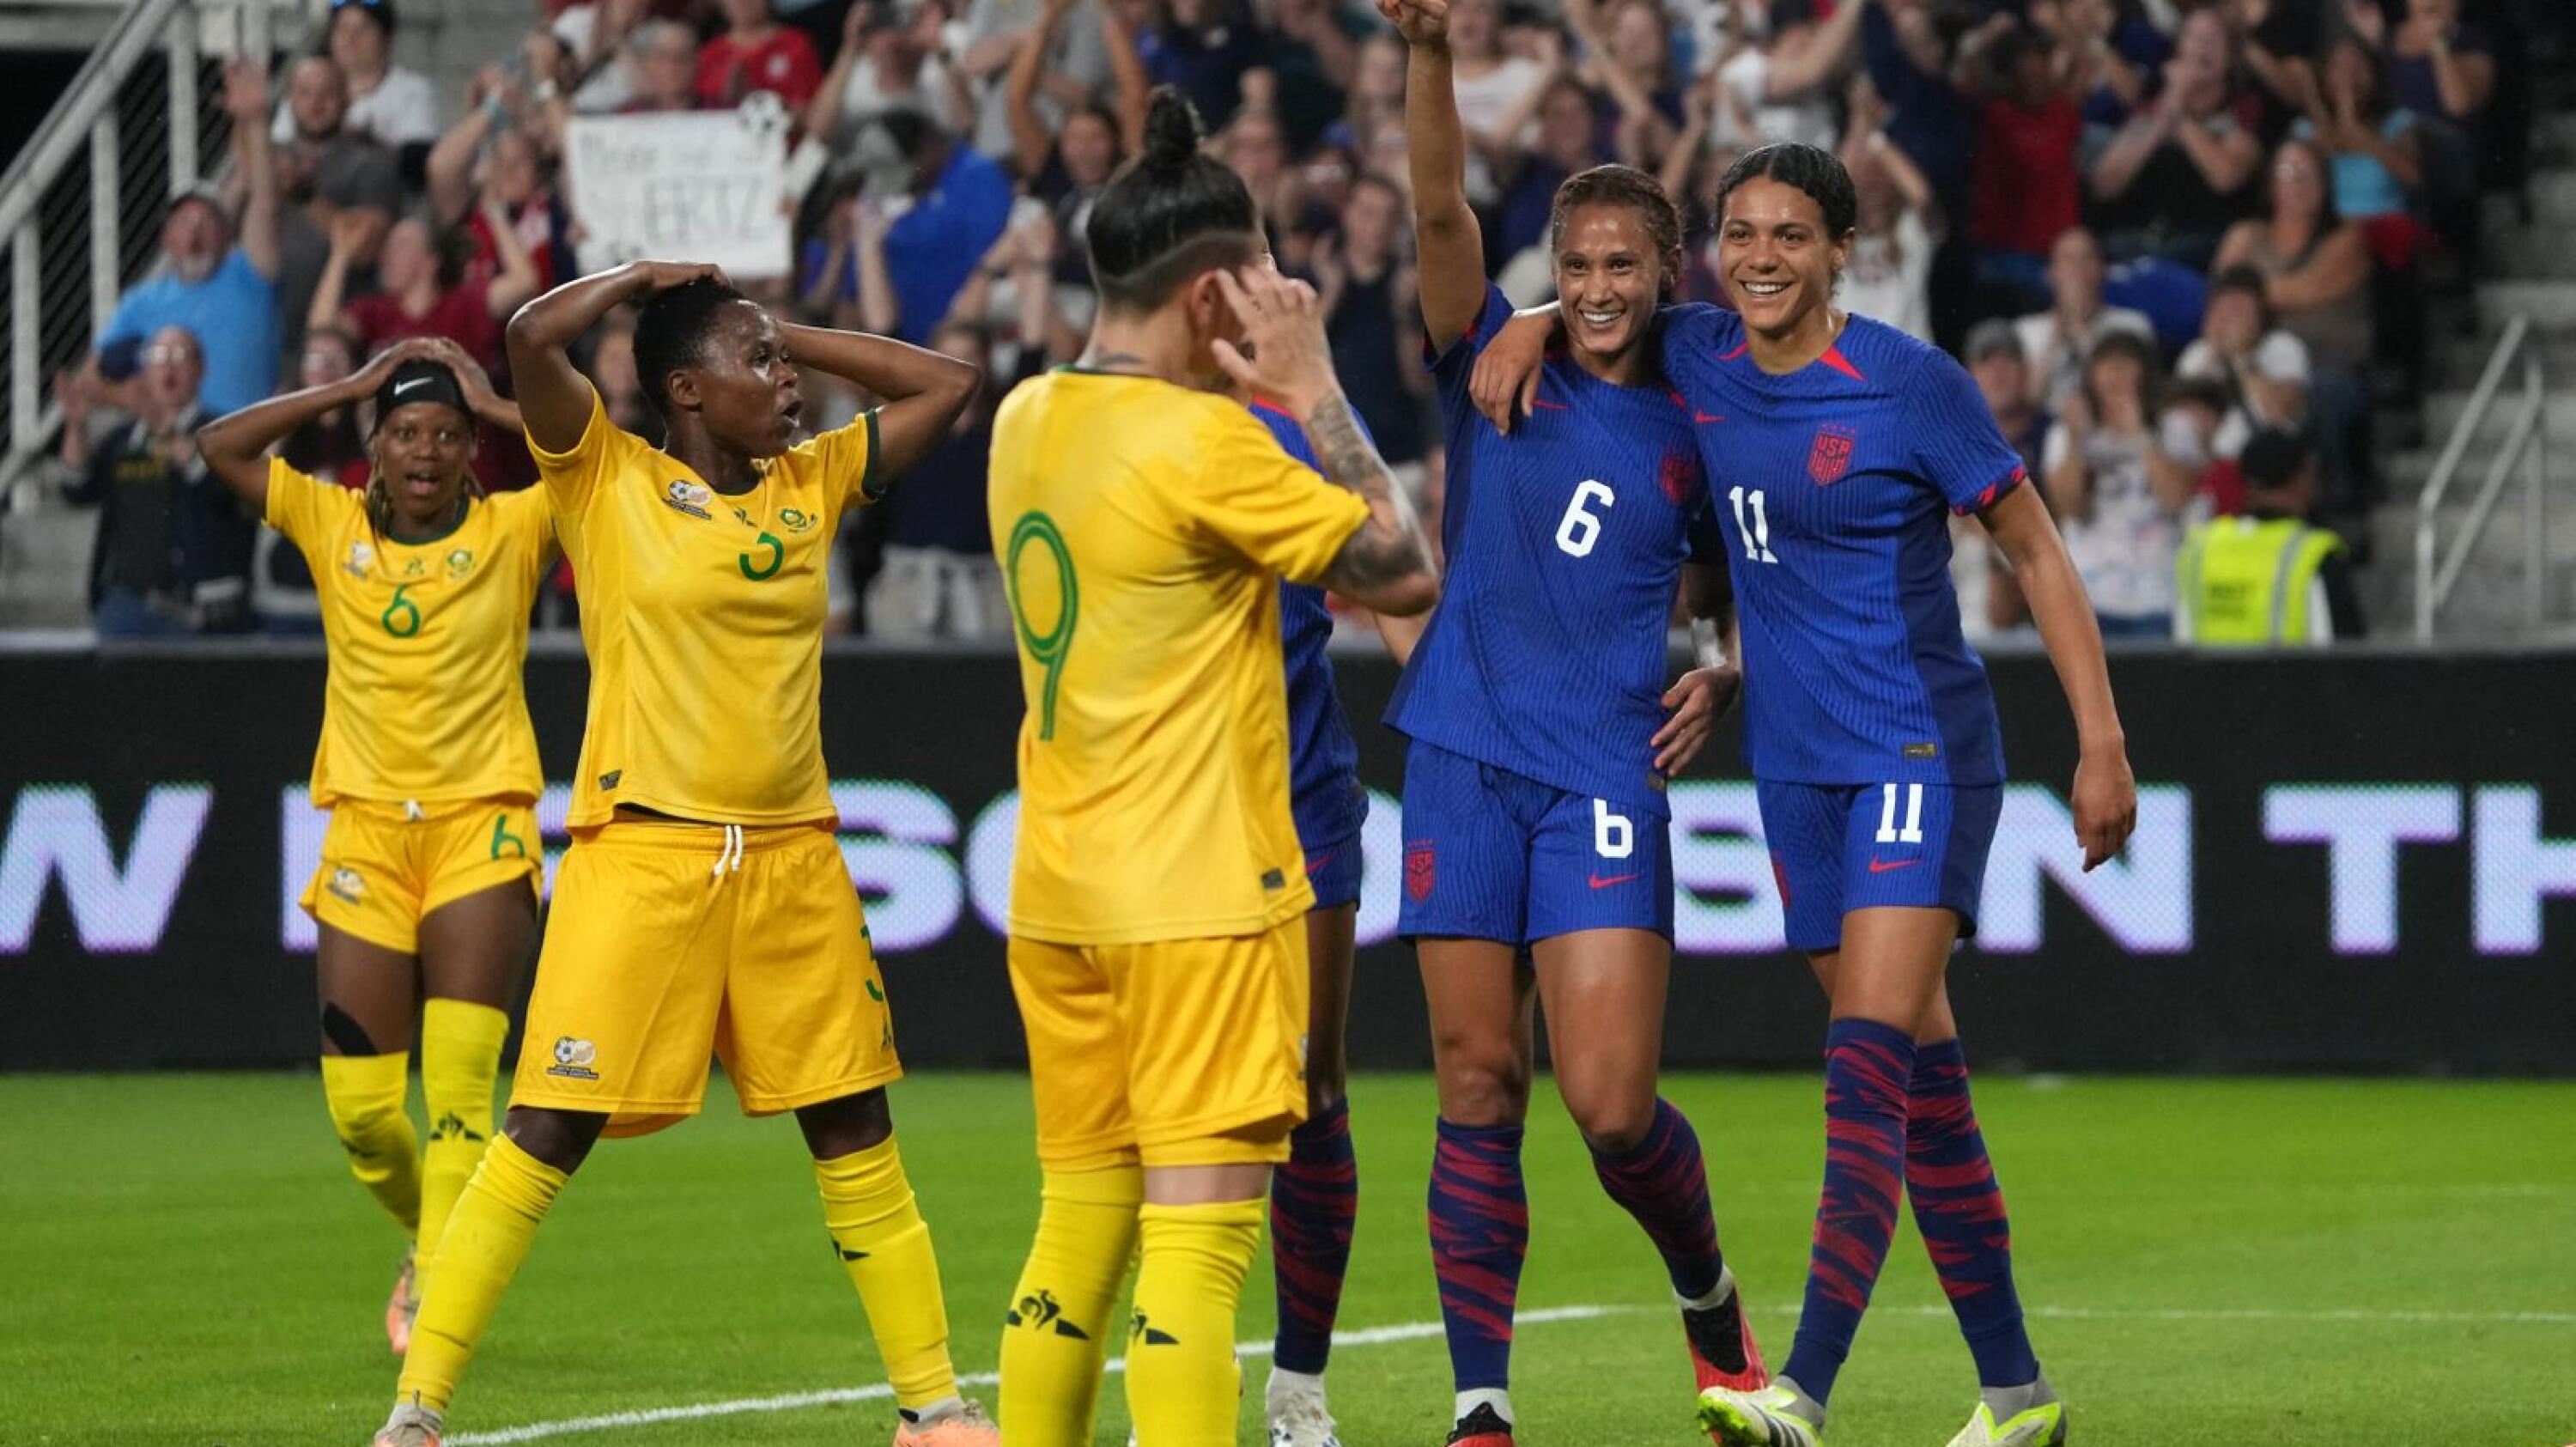 Lynn Williams #6 and Alana Cook #11 of the United States celebrate a goal during a international friendly match against Banyana Banyana 